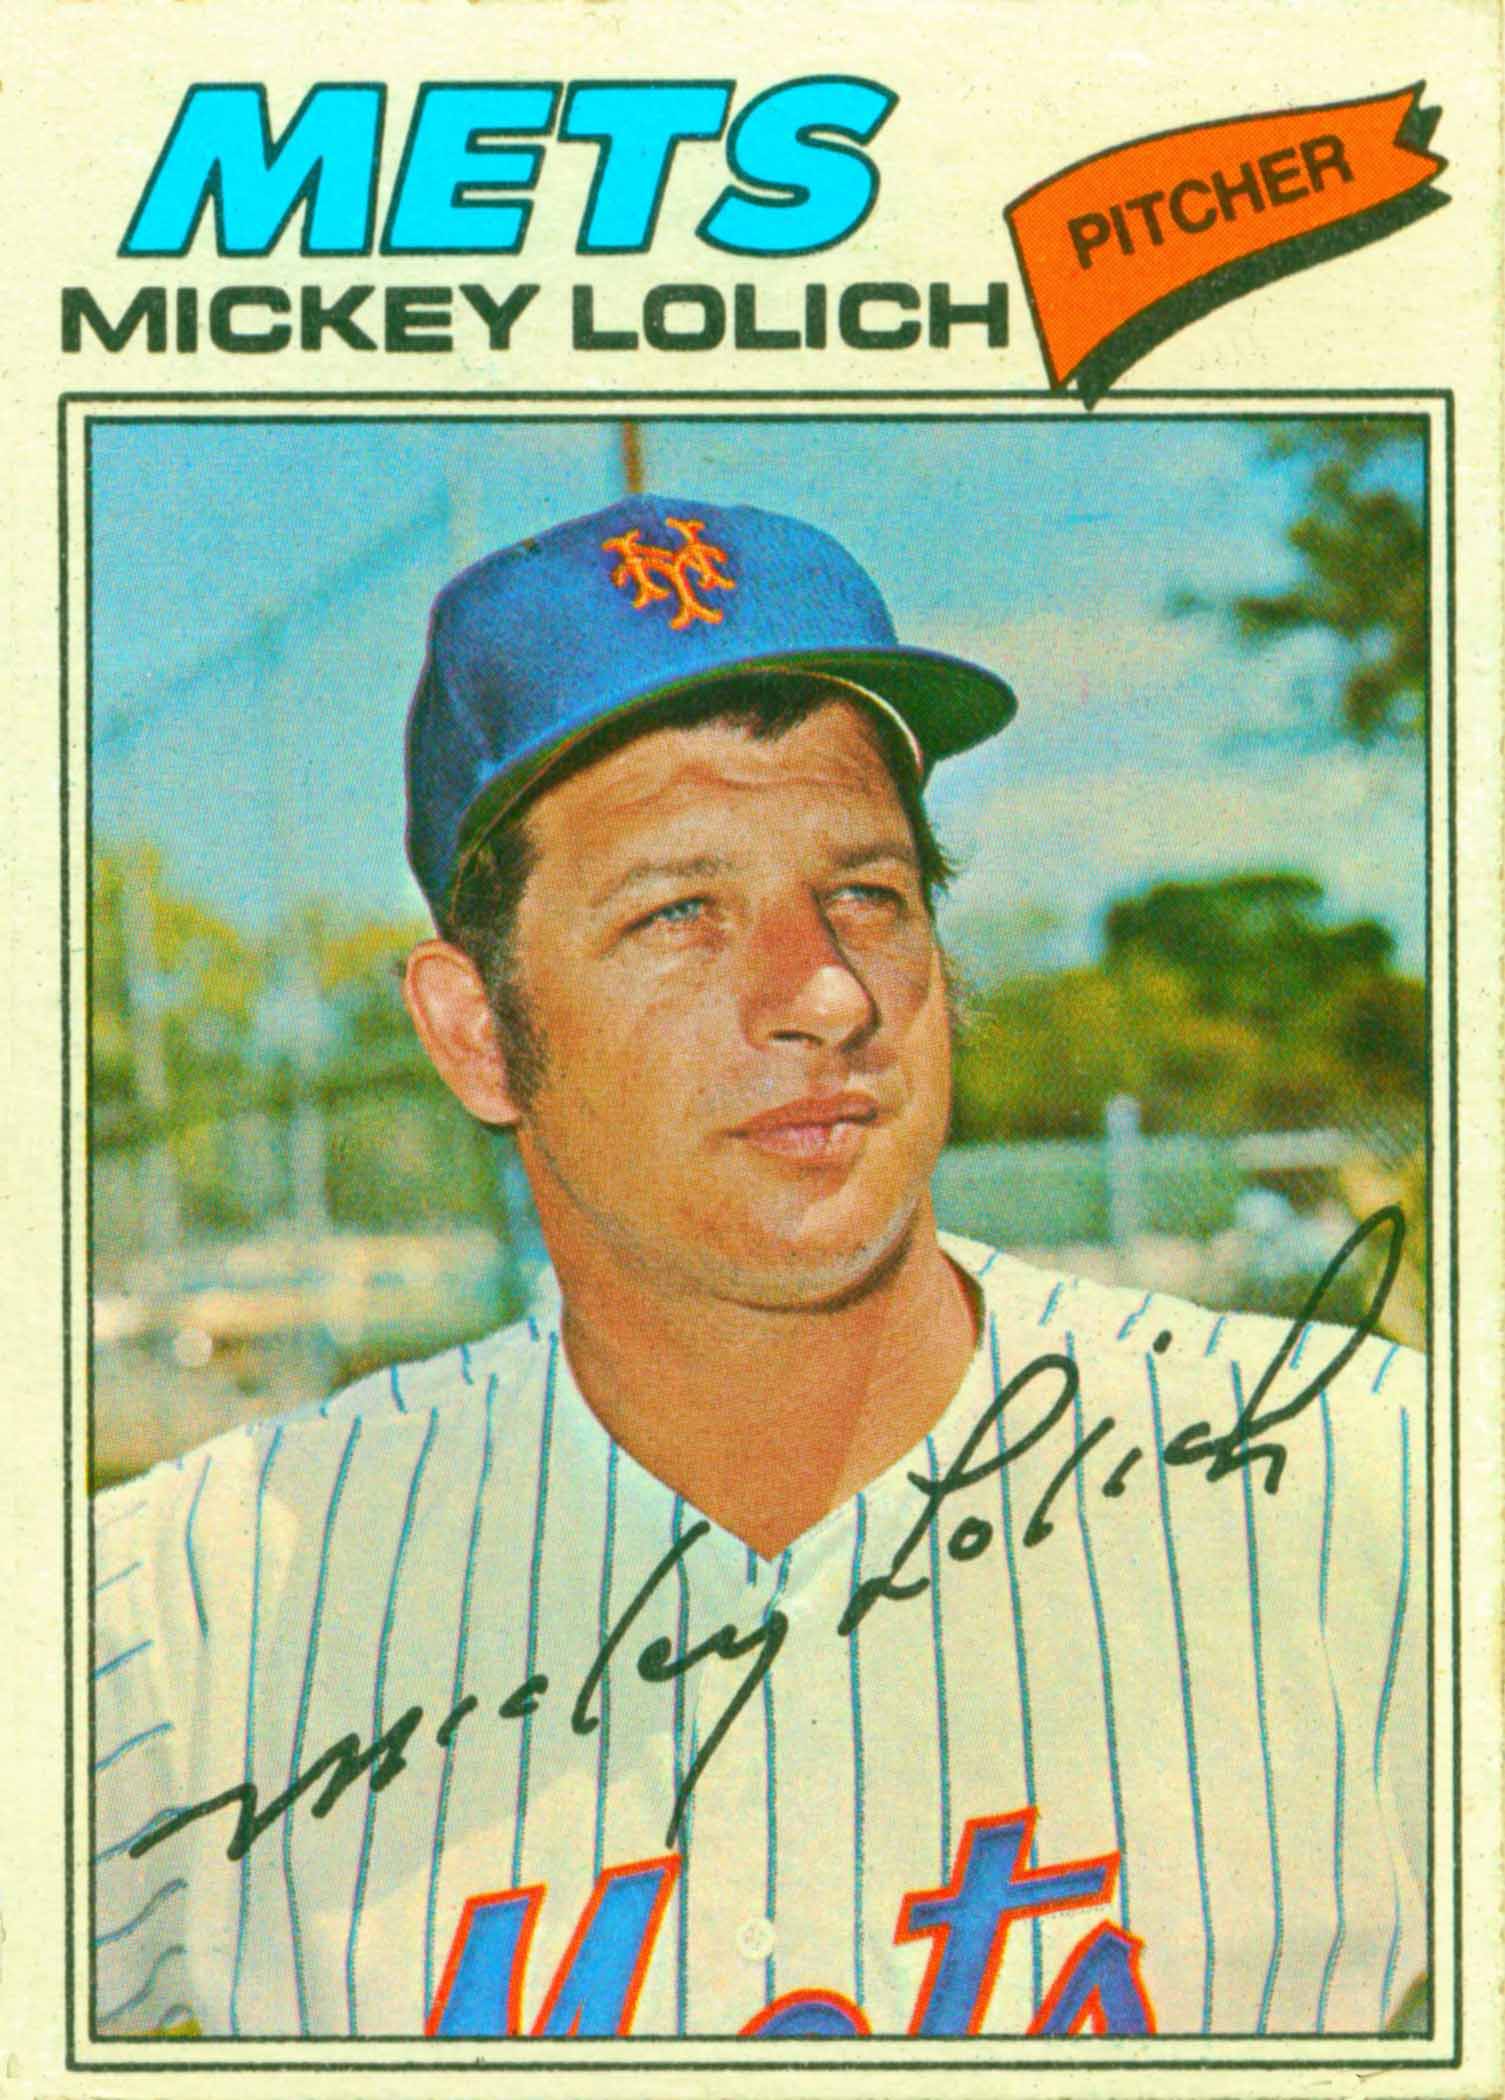 1972 Topps - Mickey Lolich #450 (Pitcher) - Autographed Ba…